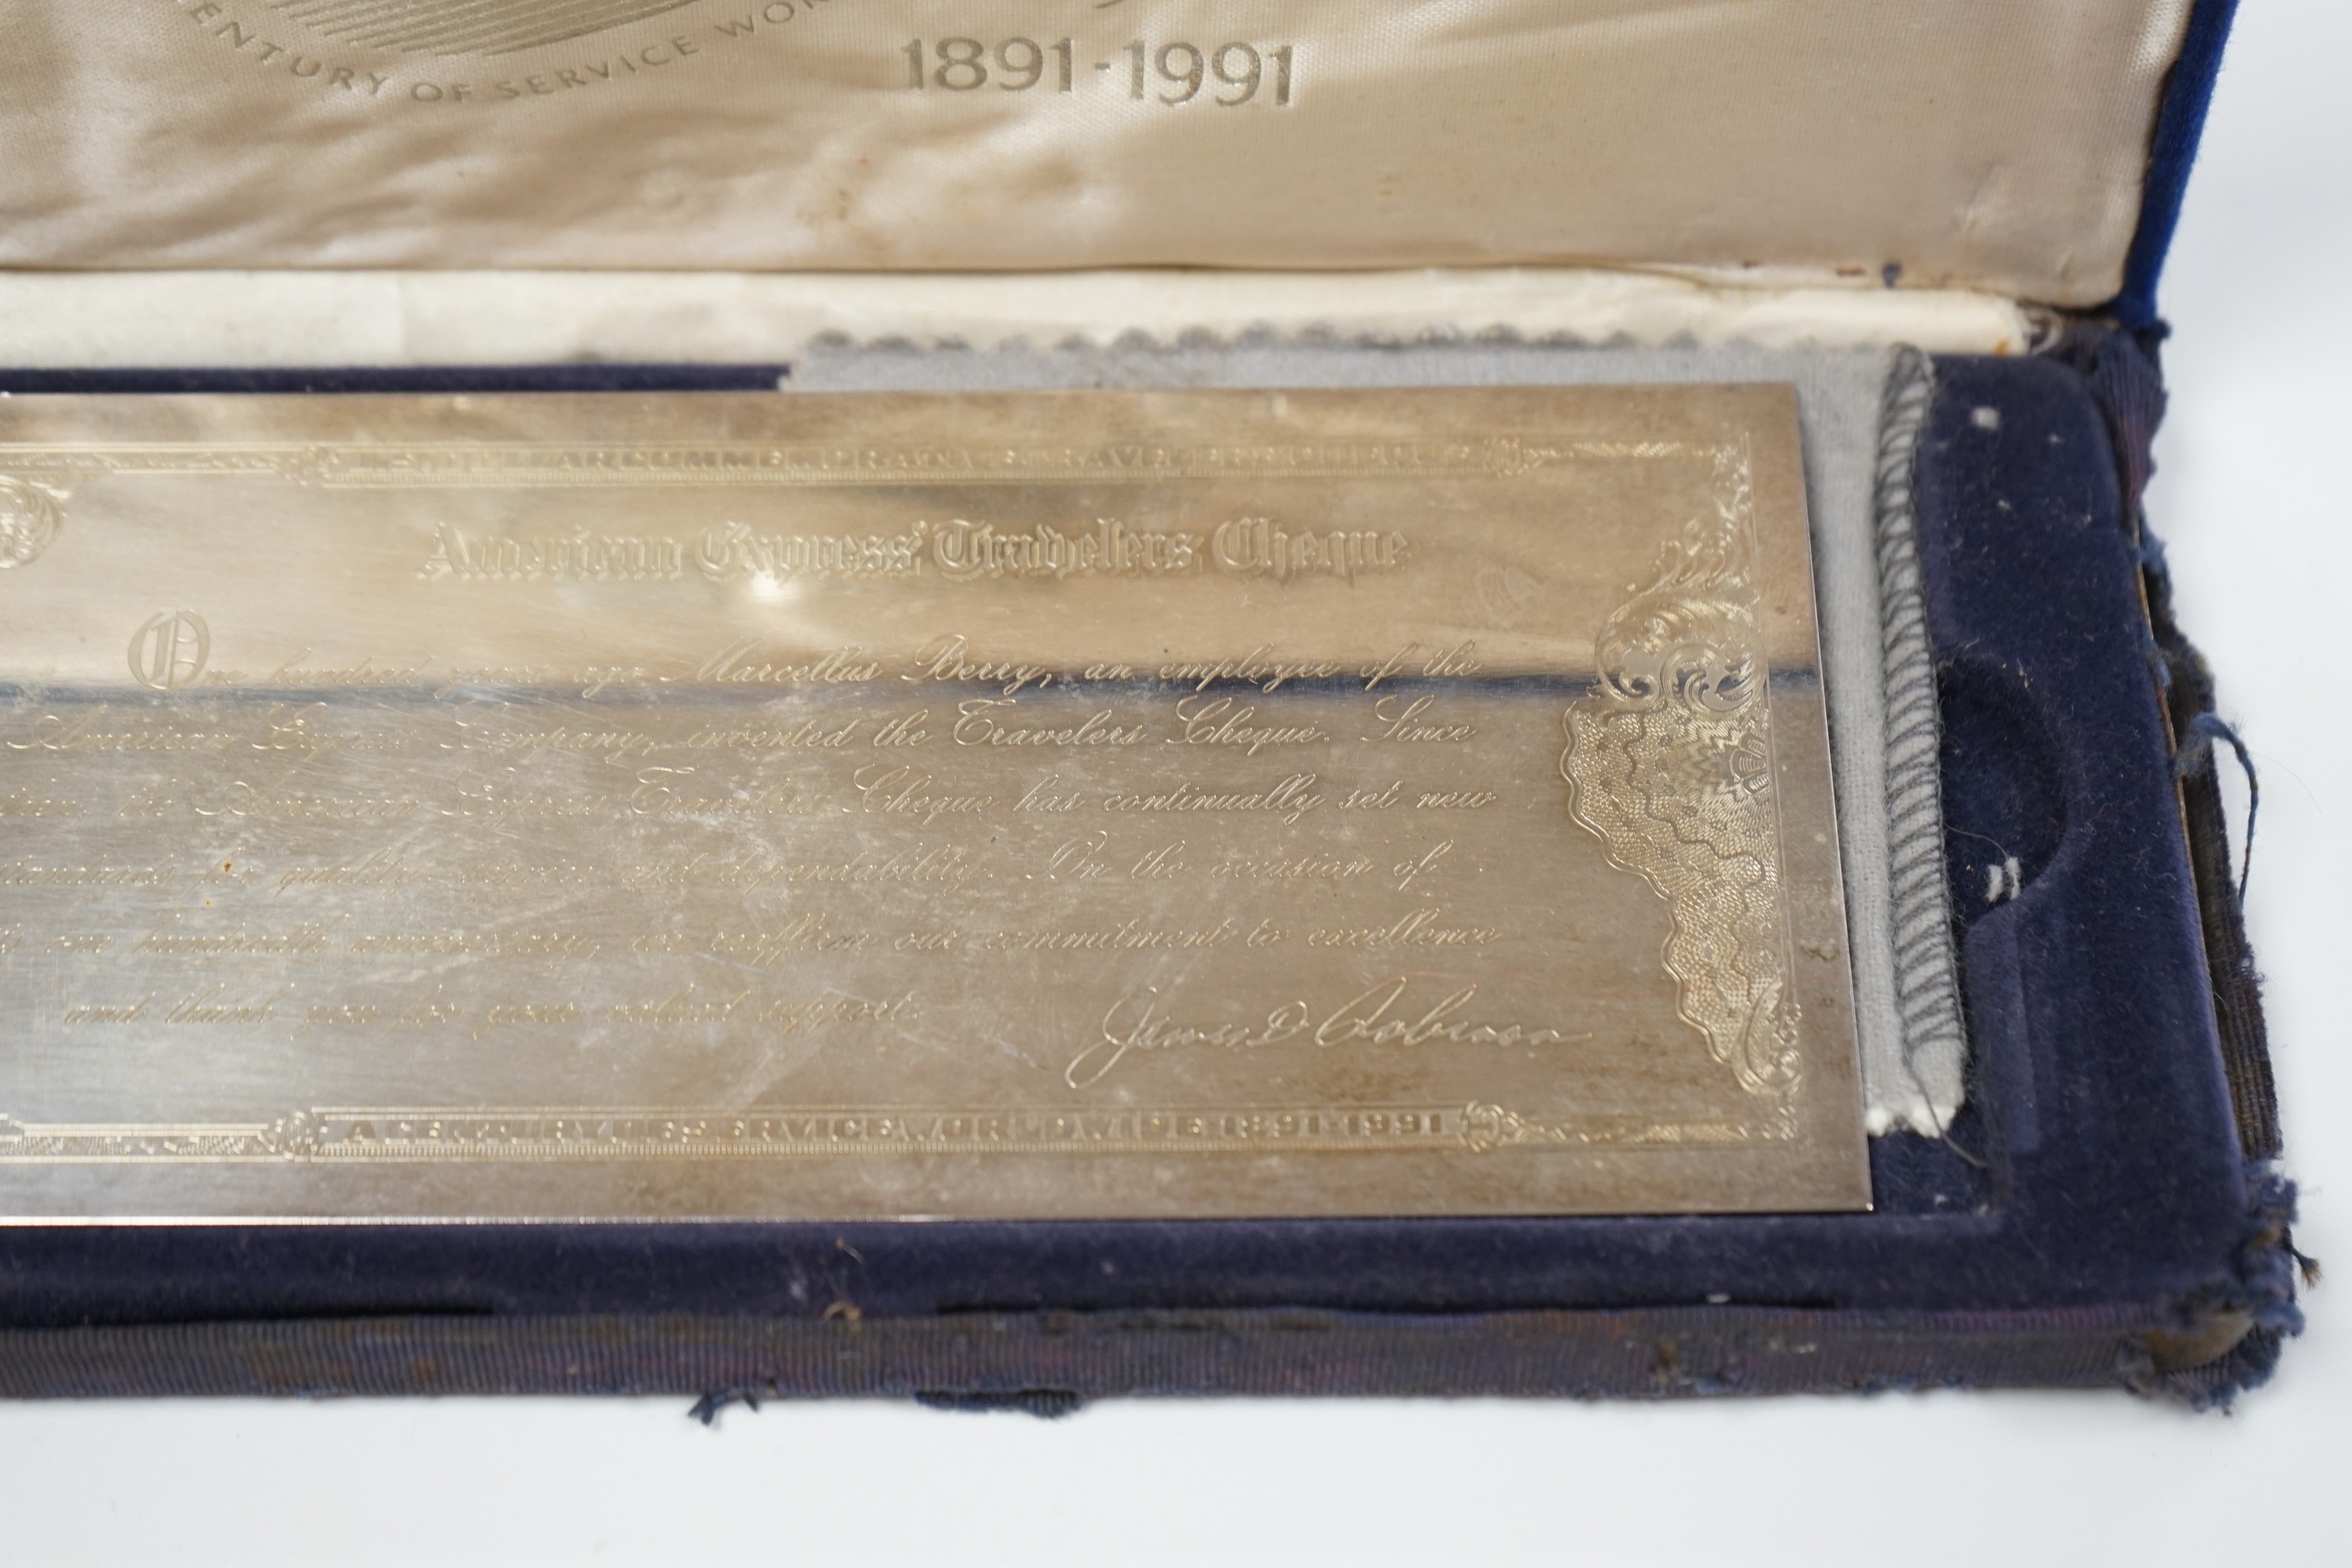 An American Express Commemorative plated Traveller's Cheque plaque